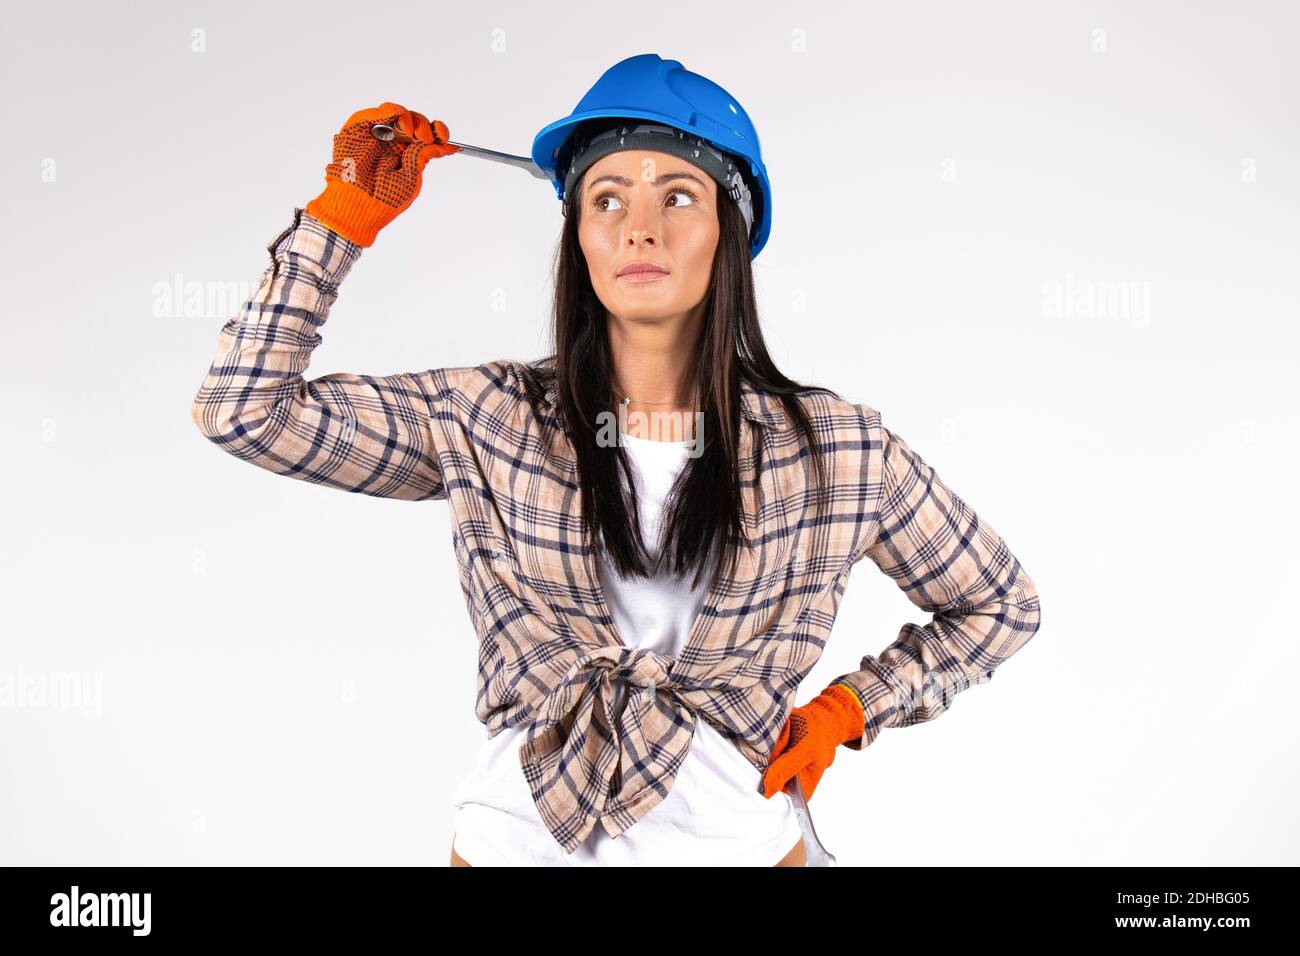 Female mechanic wearing blue hard hat holds a wrench and looks thoughtfully to the side. White background. Stock Photo